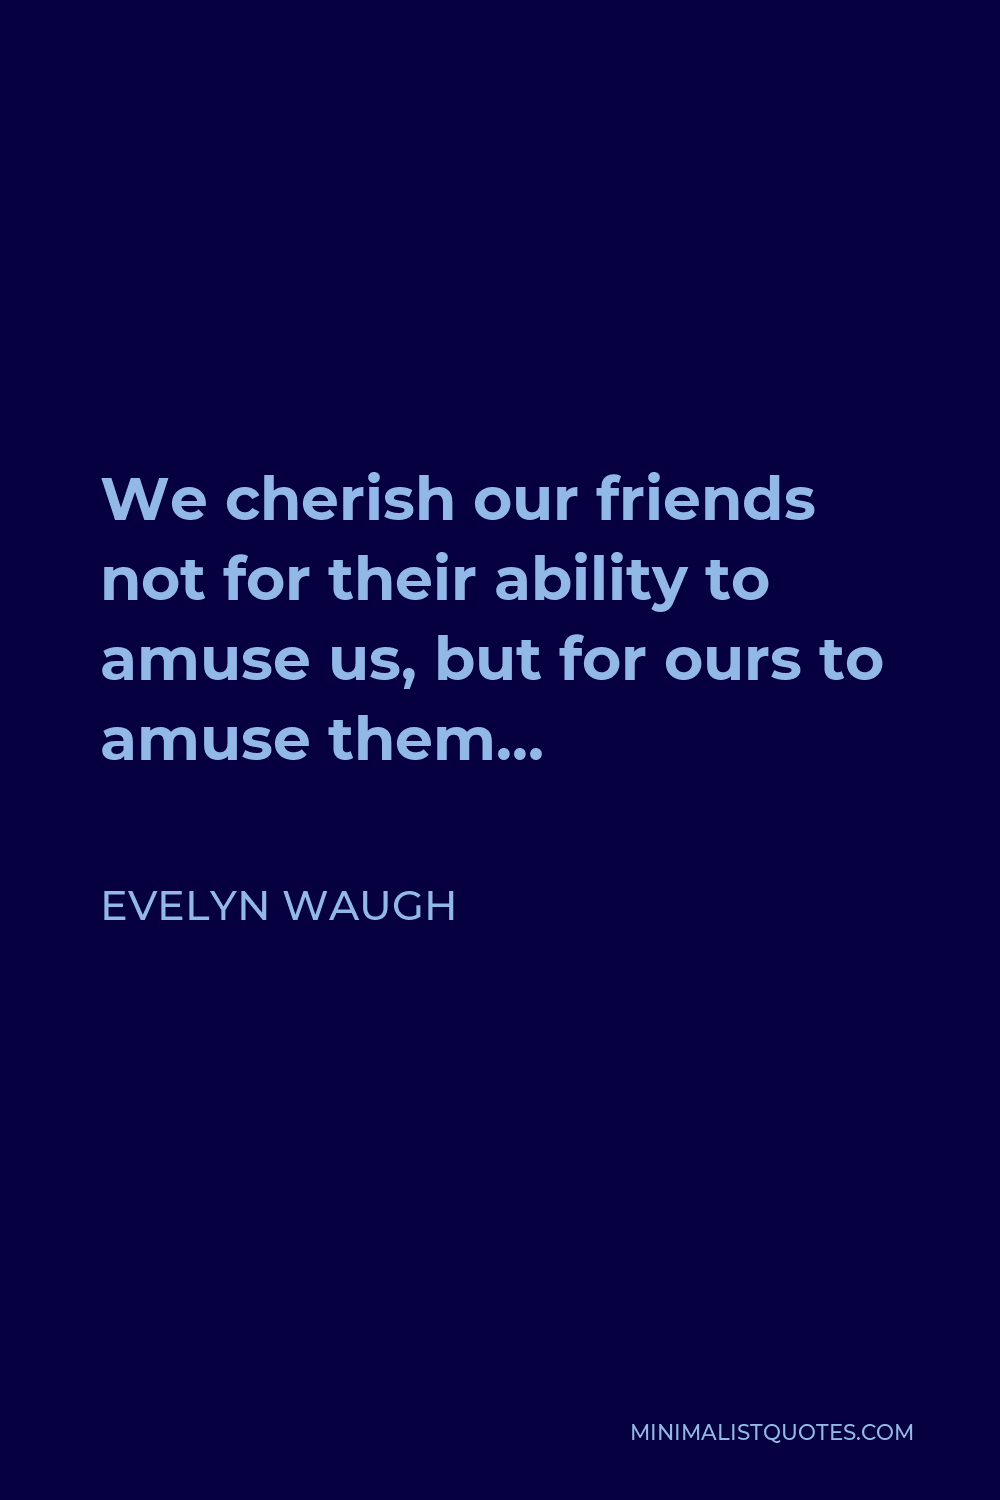 Evelyn Waugh Quote - We cherish our friends not for their ability to amuse us, but for ours to amuse them…